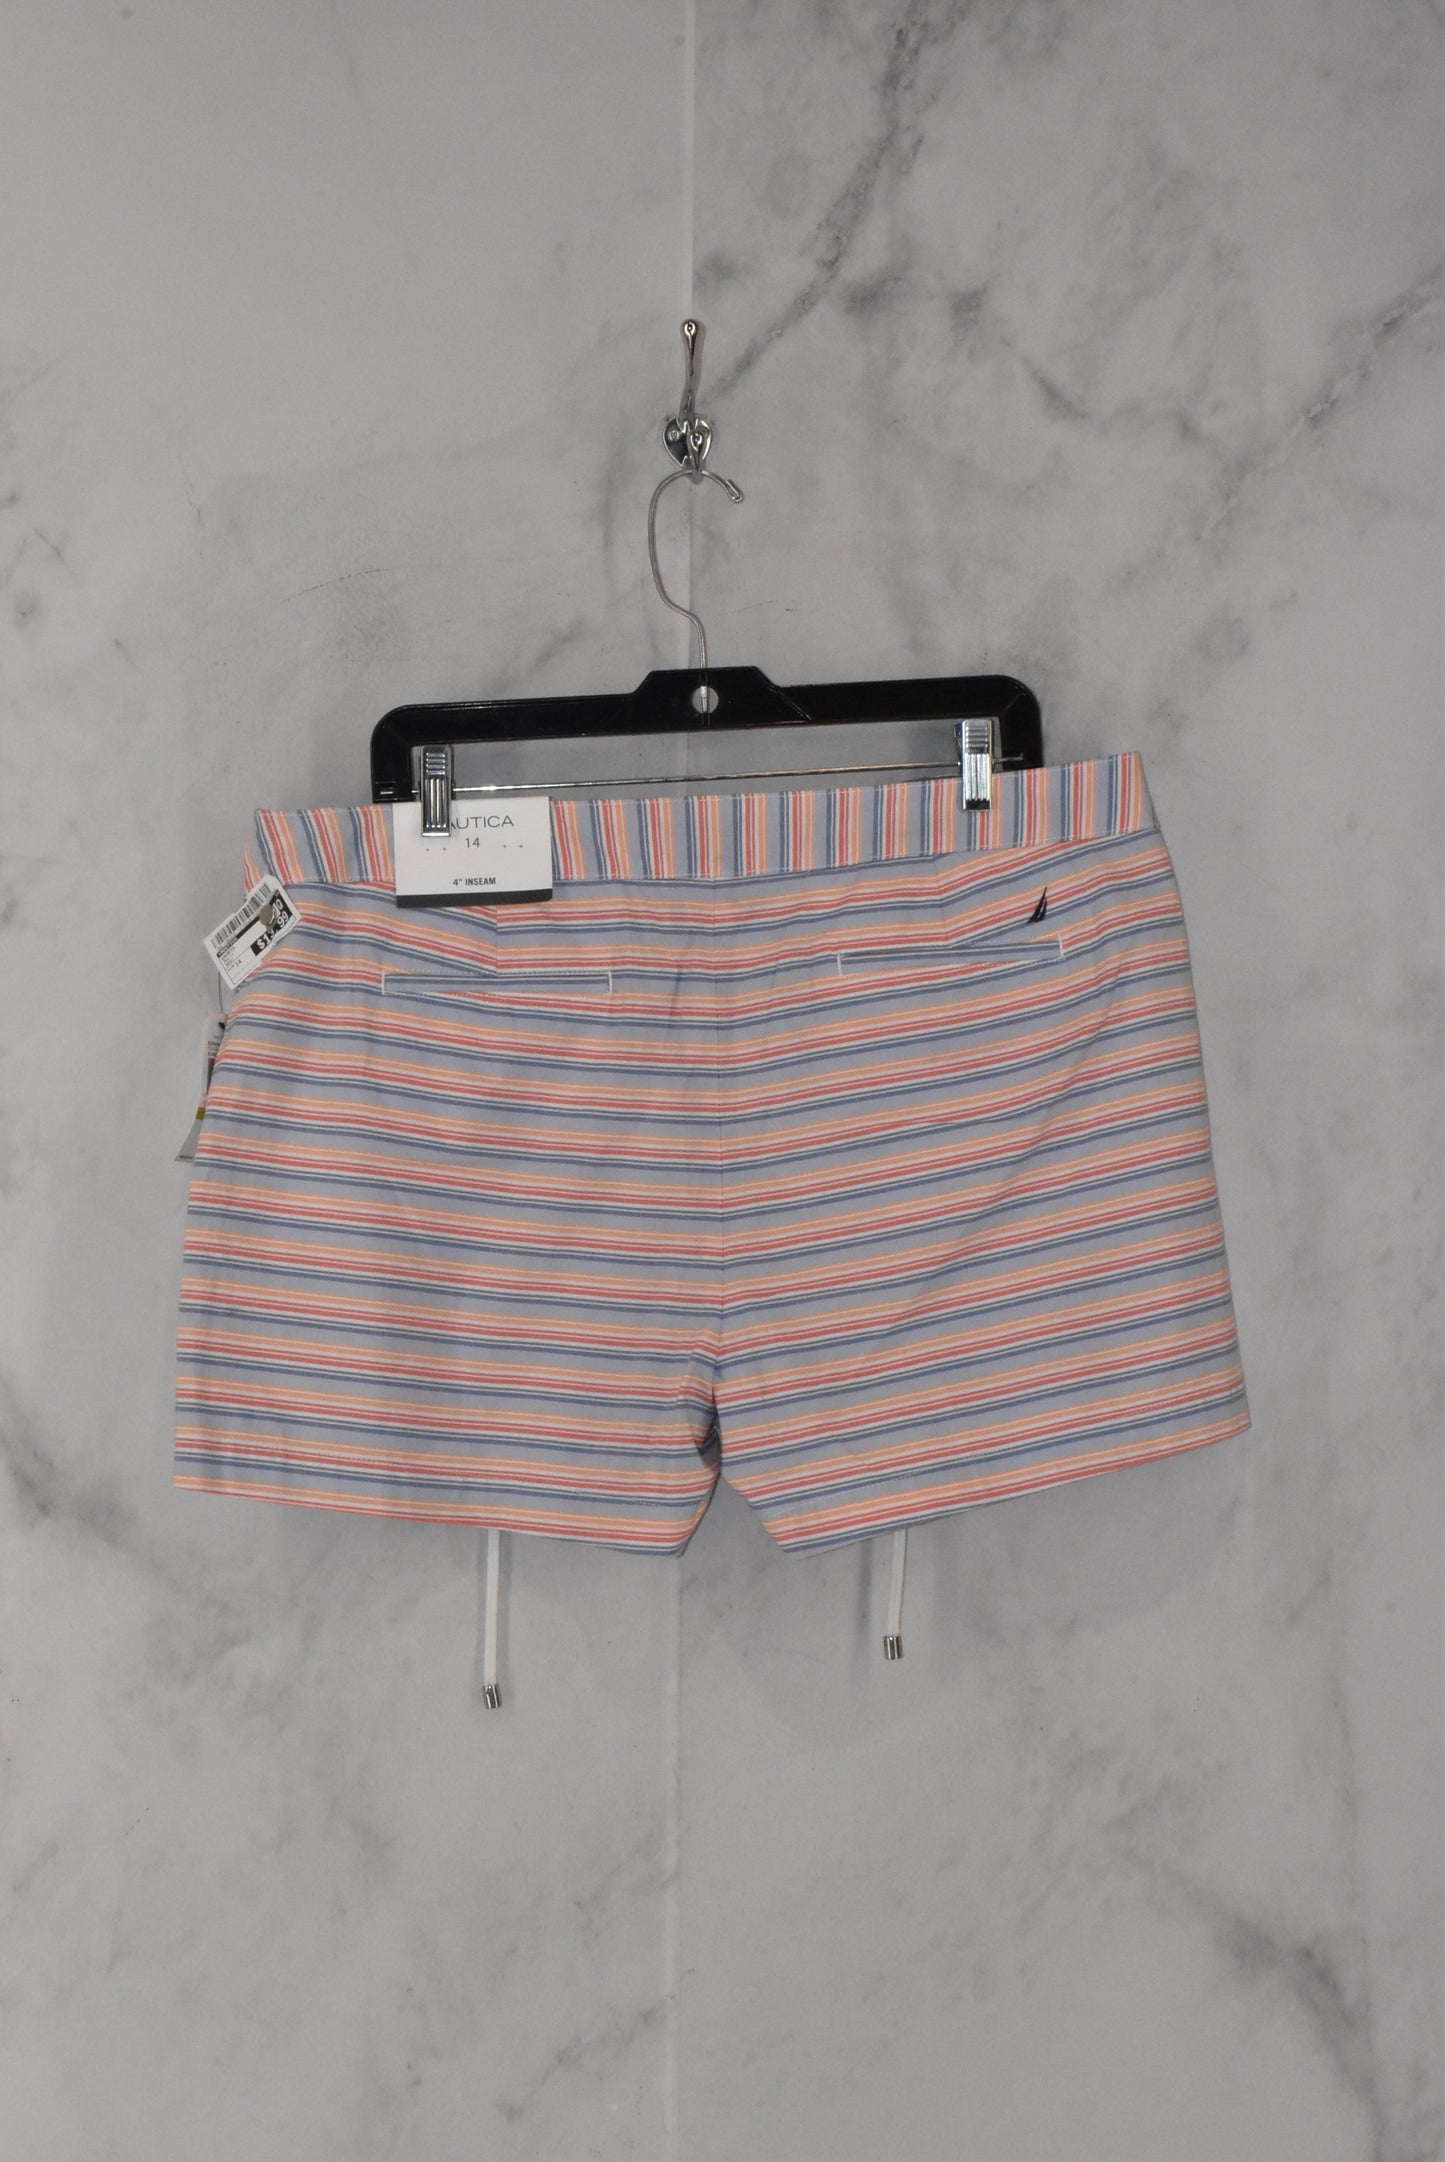 Shorts By Nautica  Size: 14